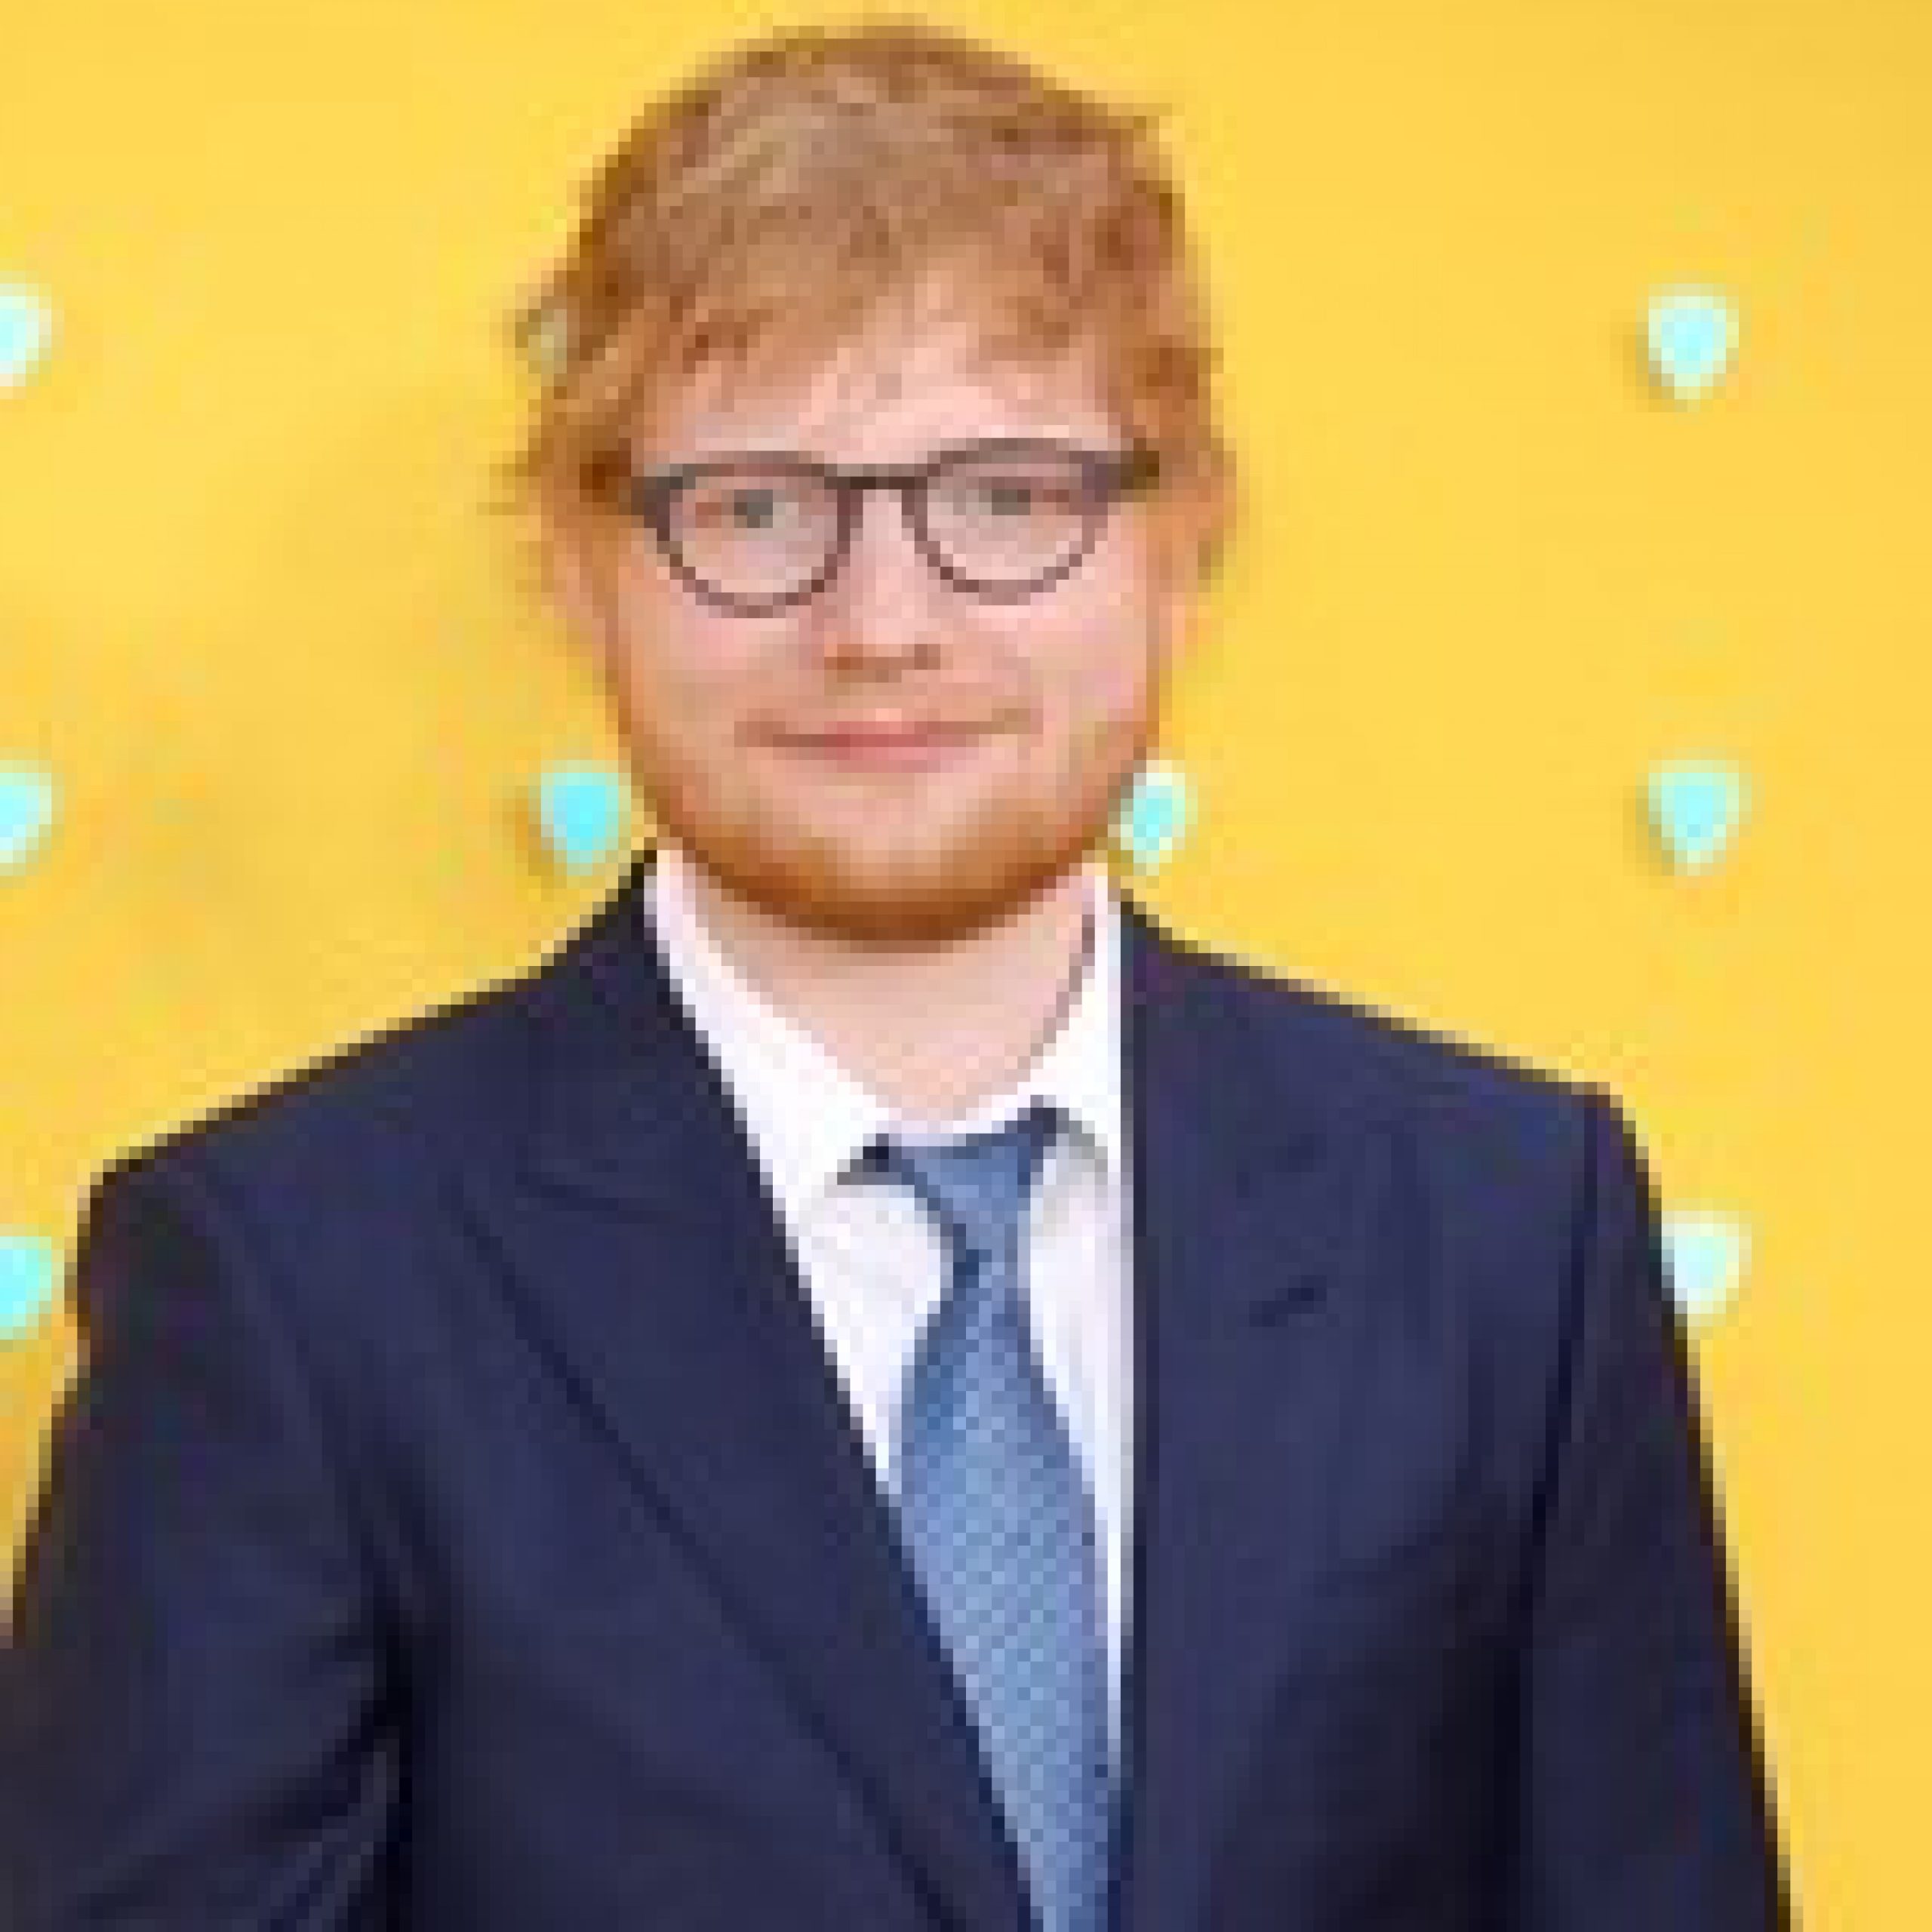 Ed Sheeran Answers Difficult Questions From Kids: Watch